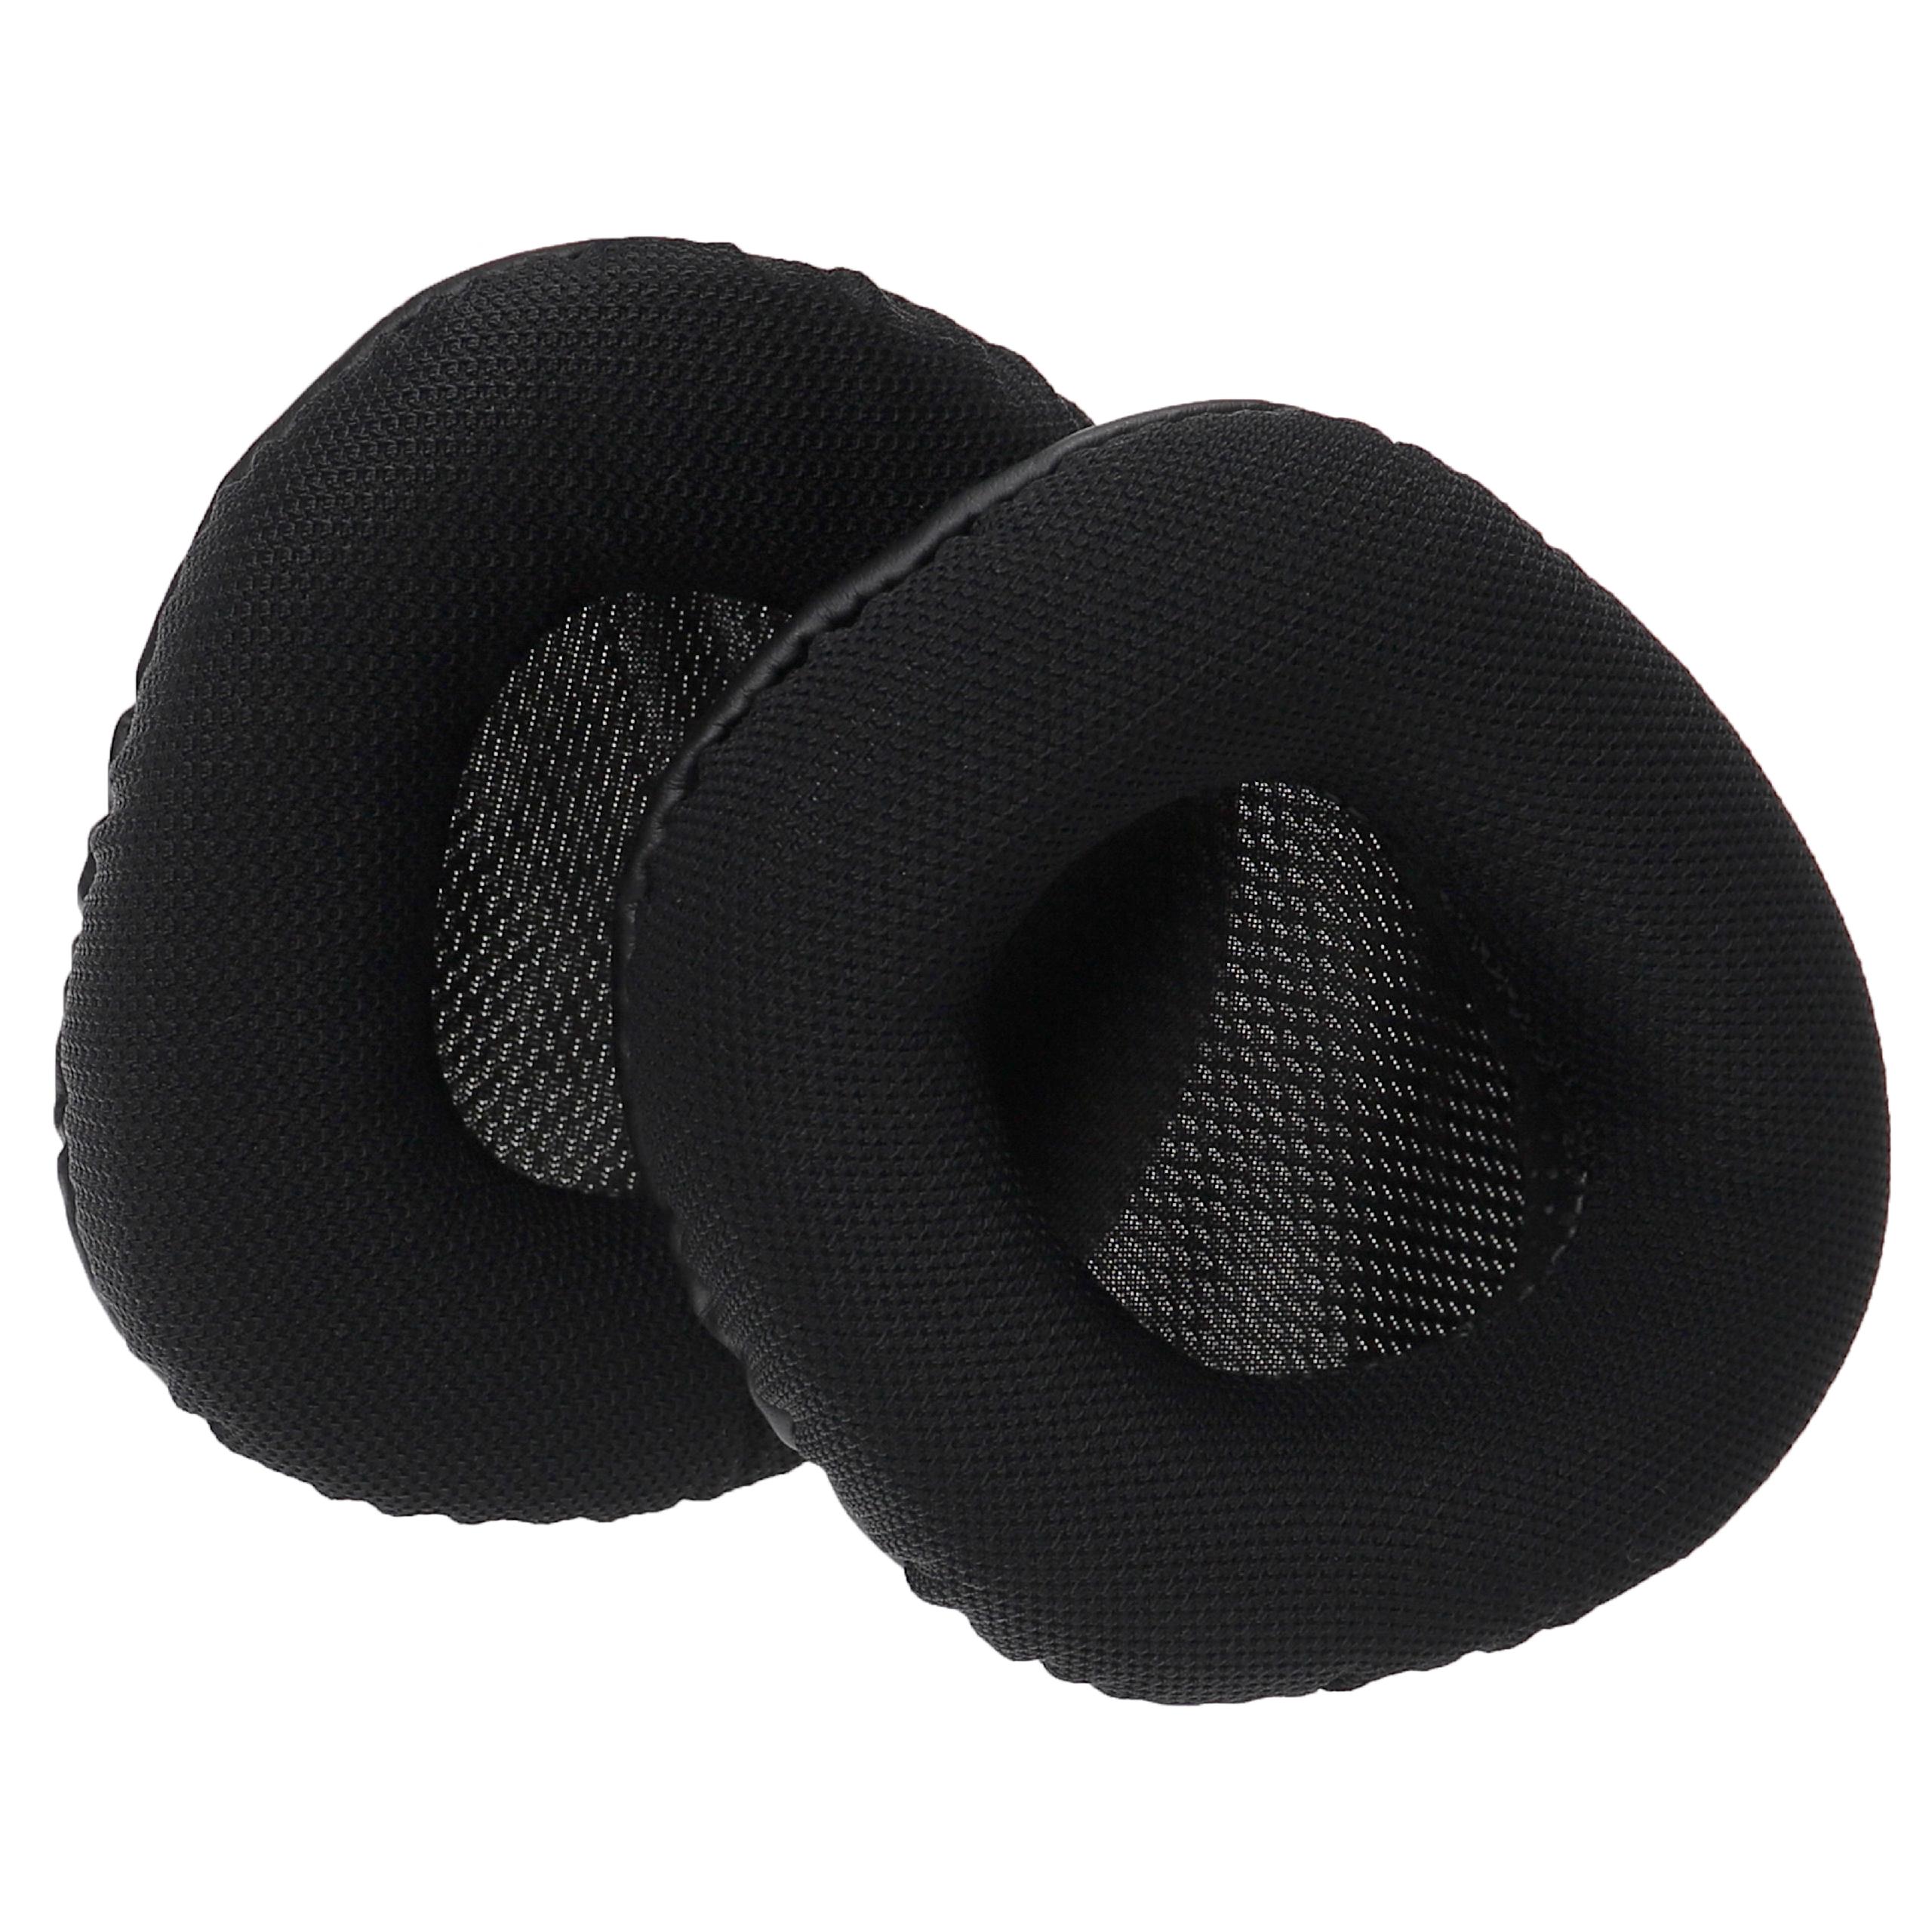 Ear pad cushions ear cups soft and highly elastic material black for headphones Headset